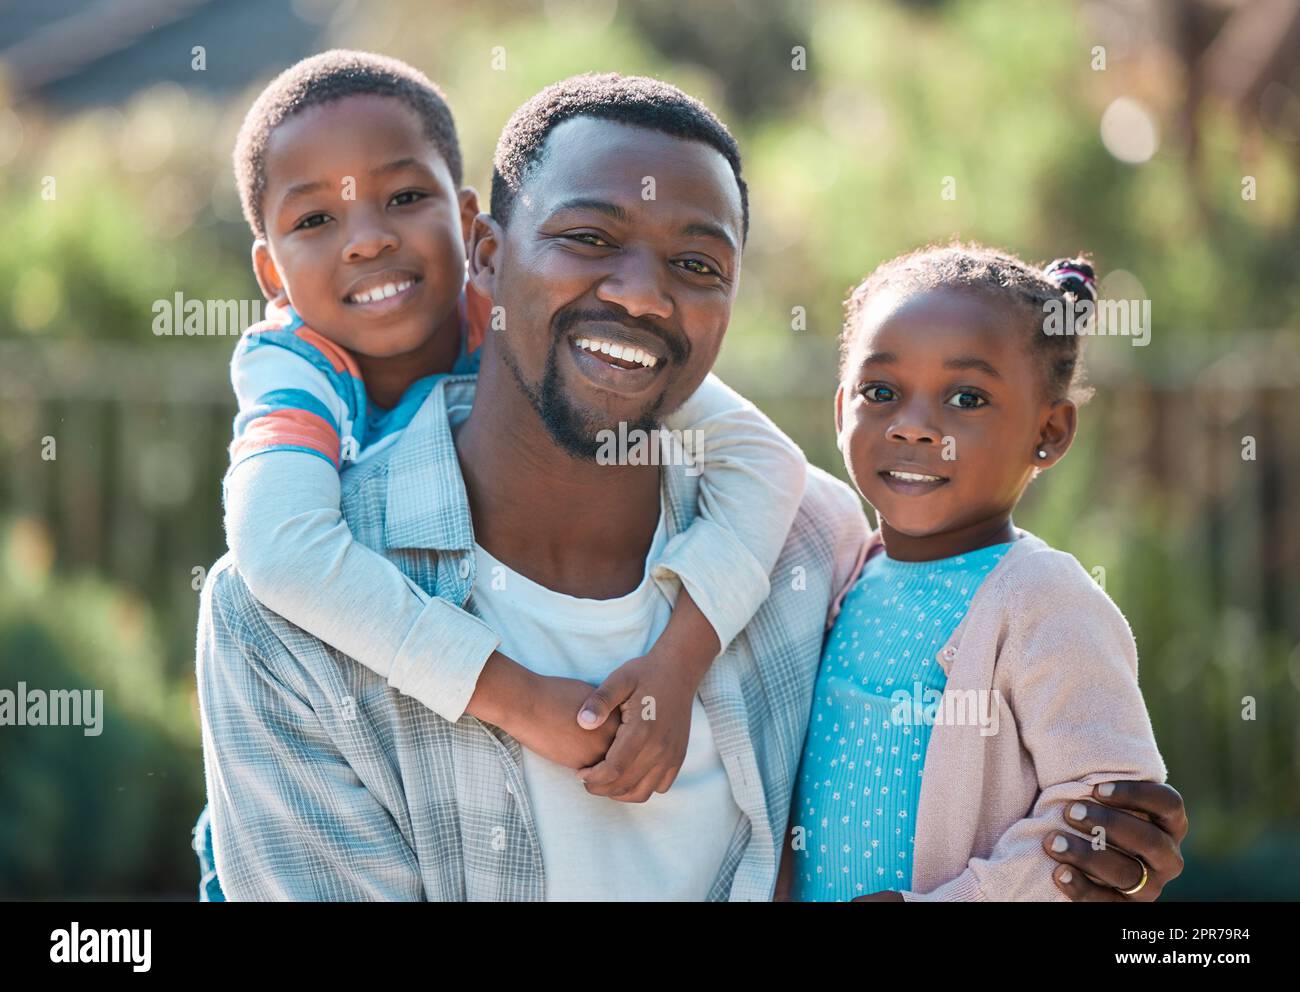 Father is a verb. Its something you do. Not just who you are. a man spending time outdoors with his two children. Stock Photo